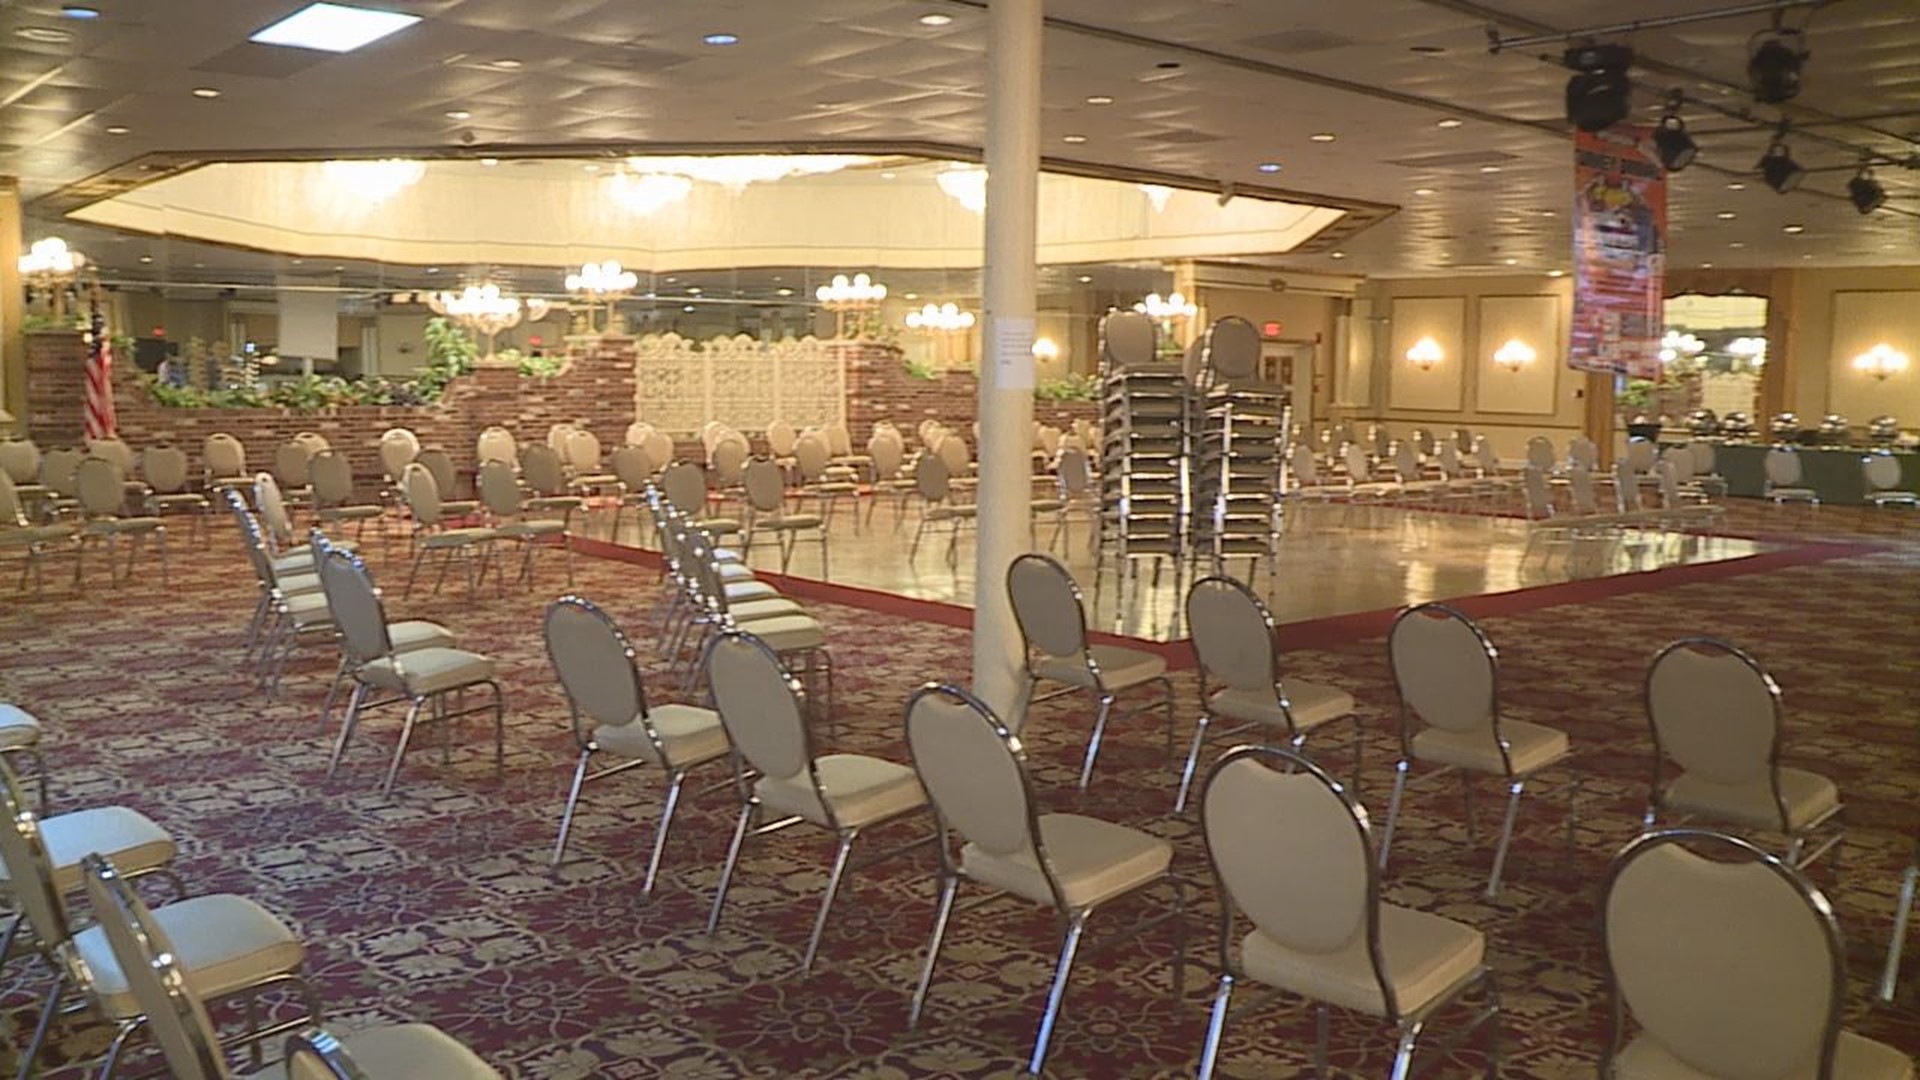 Ballroom Remains Set Up for Next Scheduled Event in February